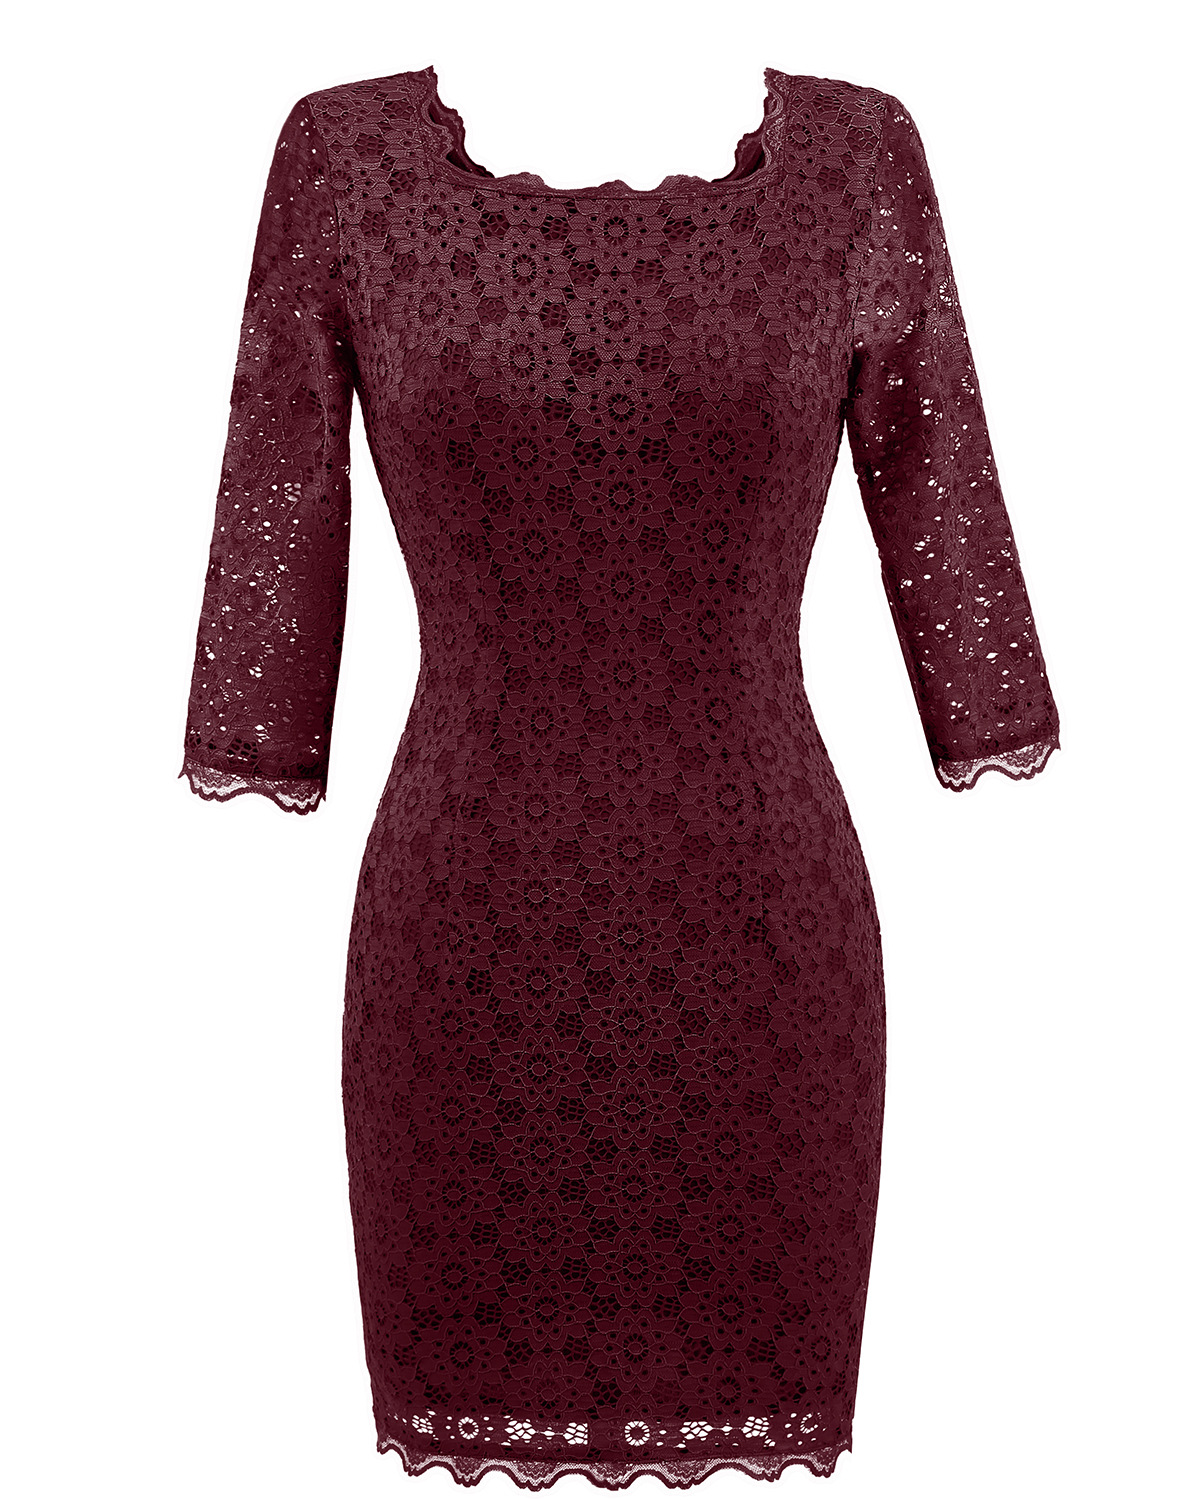 Women's Vintage Square Collar 2/3 Sleeve Floral Lace Sheath Bodycon Dresses - Wine Red